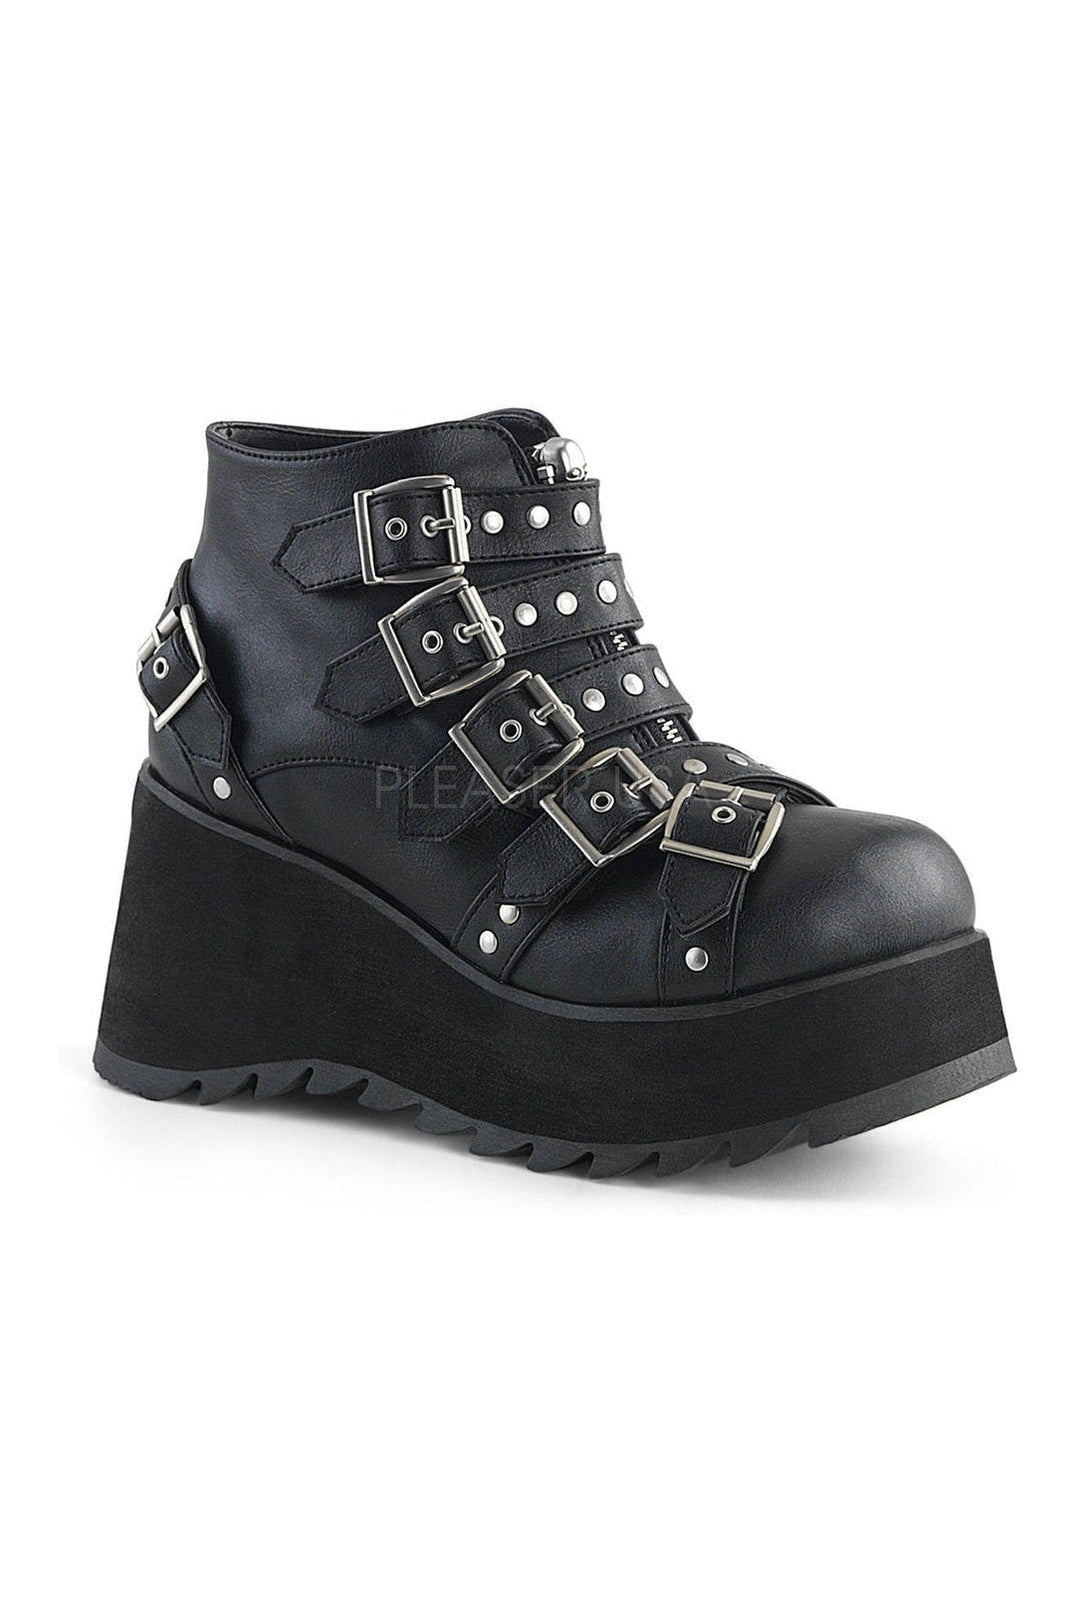 SCENE-30 Demonia Wedge | Black Faux Leather-Demonia-Black-Ankle Boots-SEXYSHOES.COM